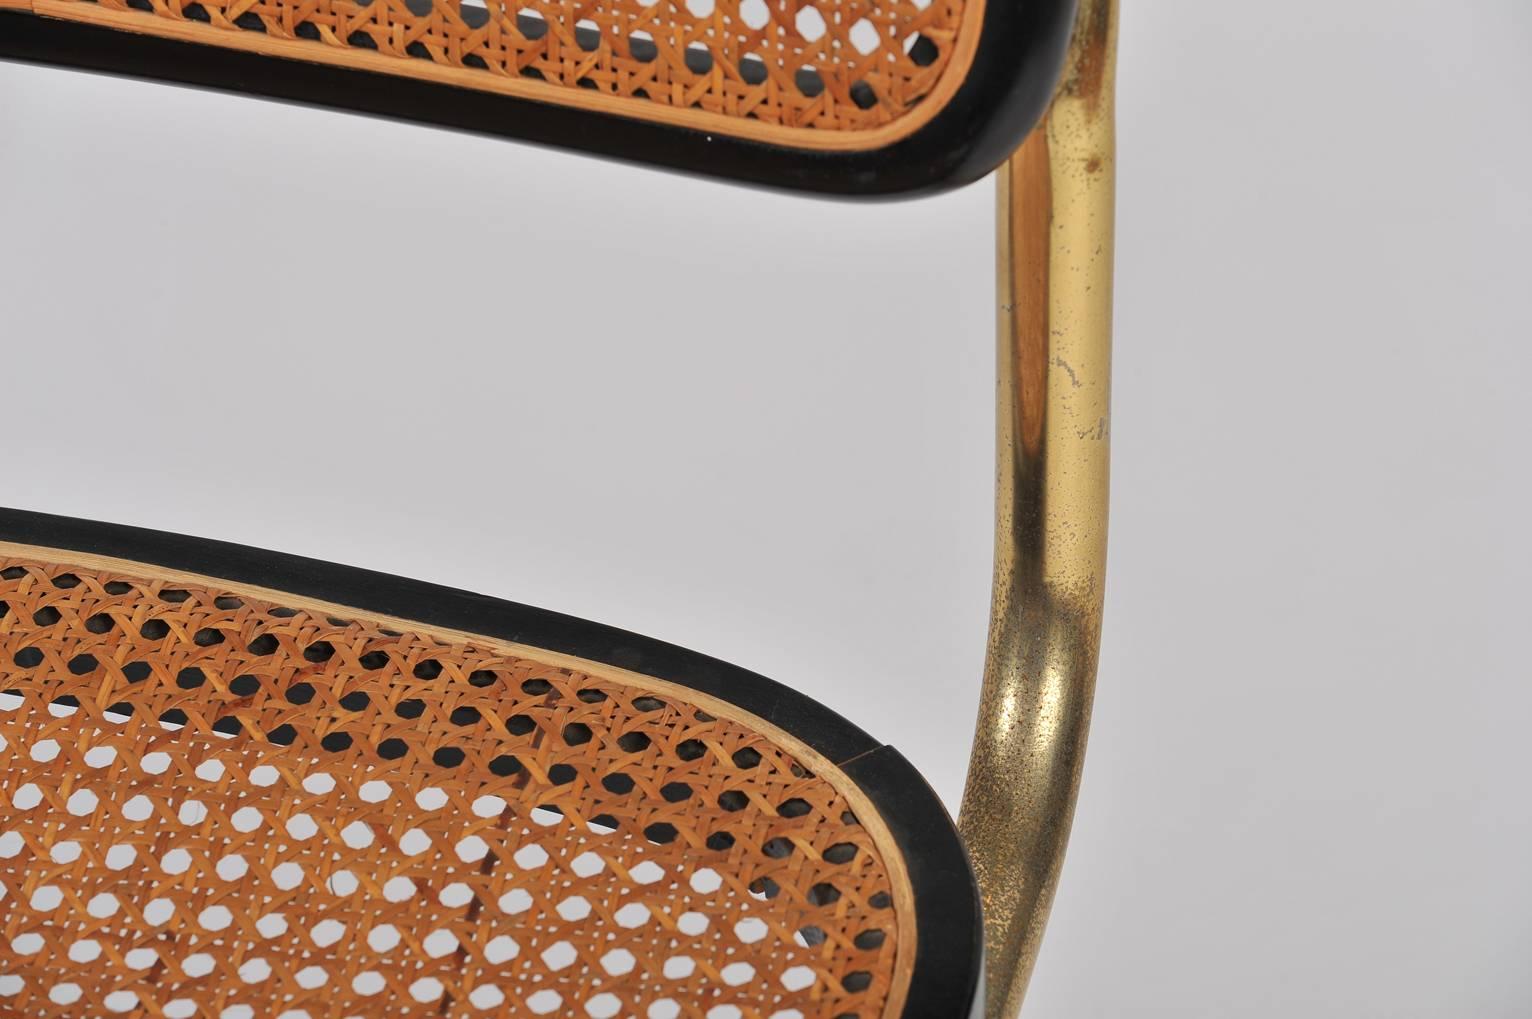 20th Century Pair of Gold and Cane Cesca Chairs by Marcel Breuer, 1928